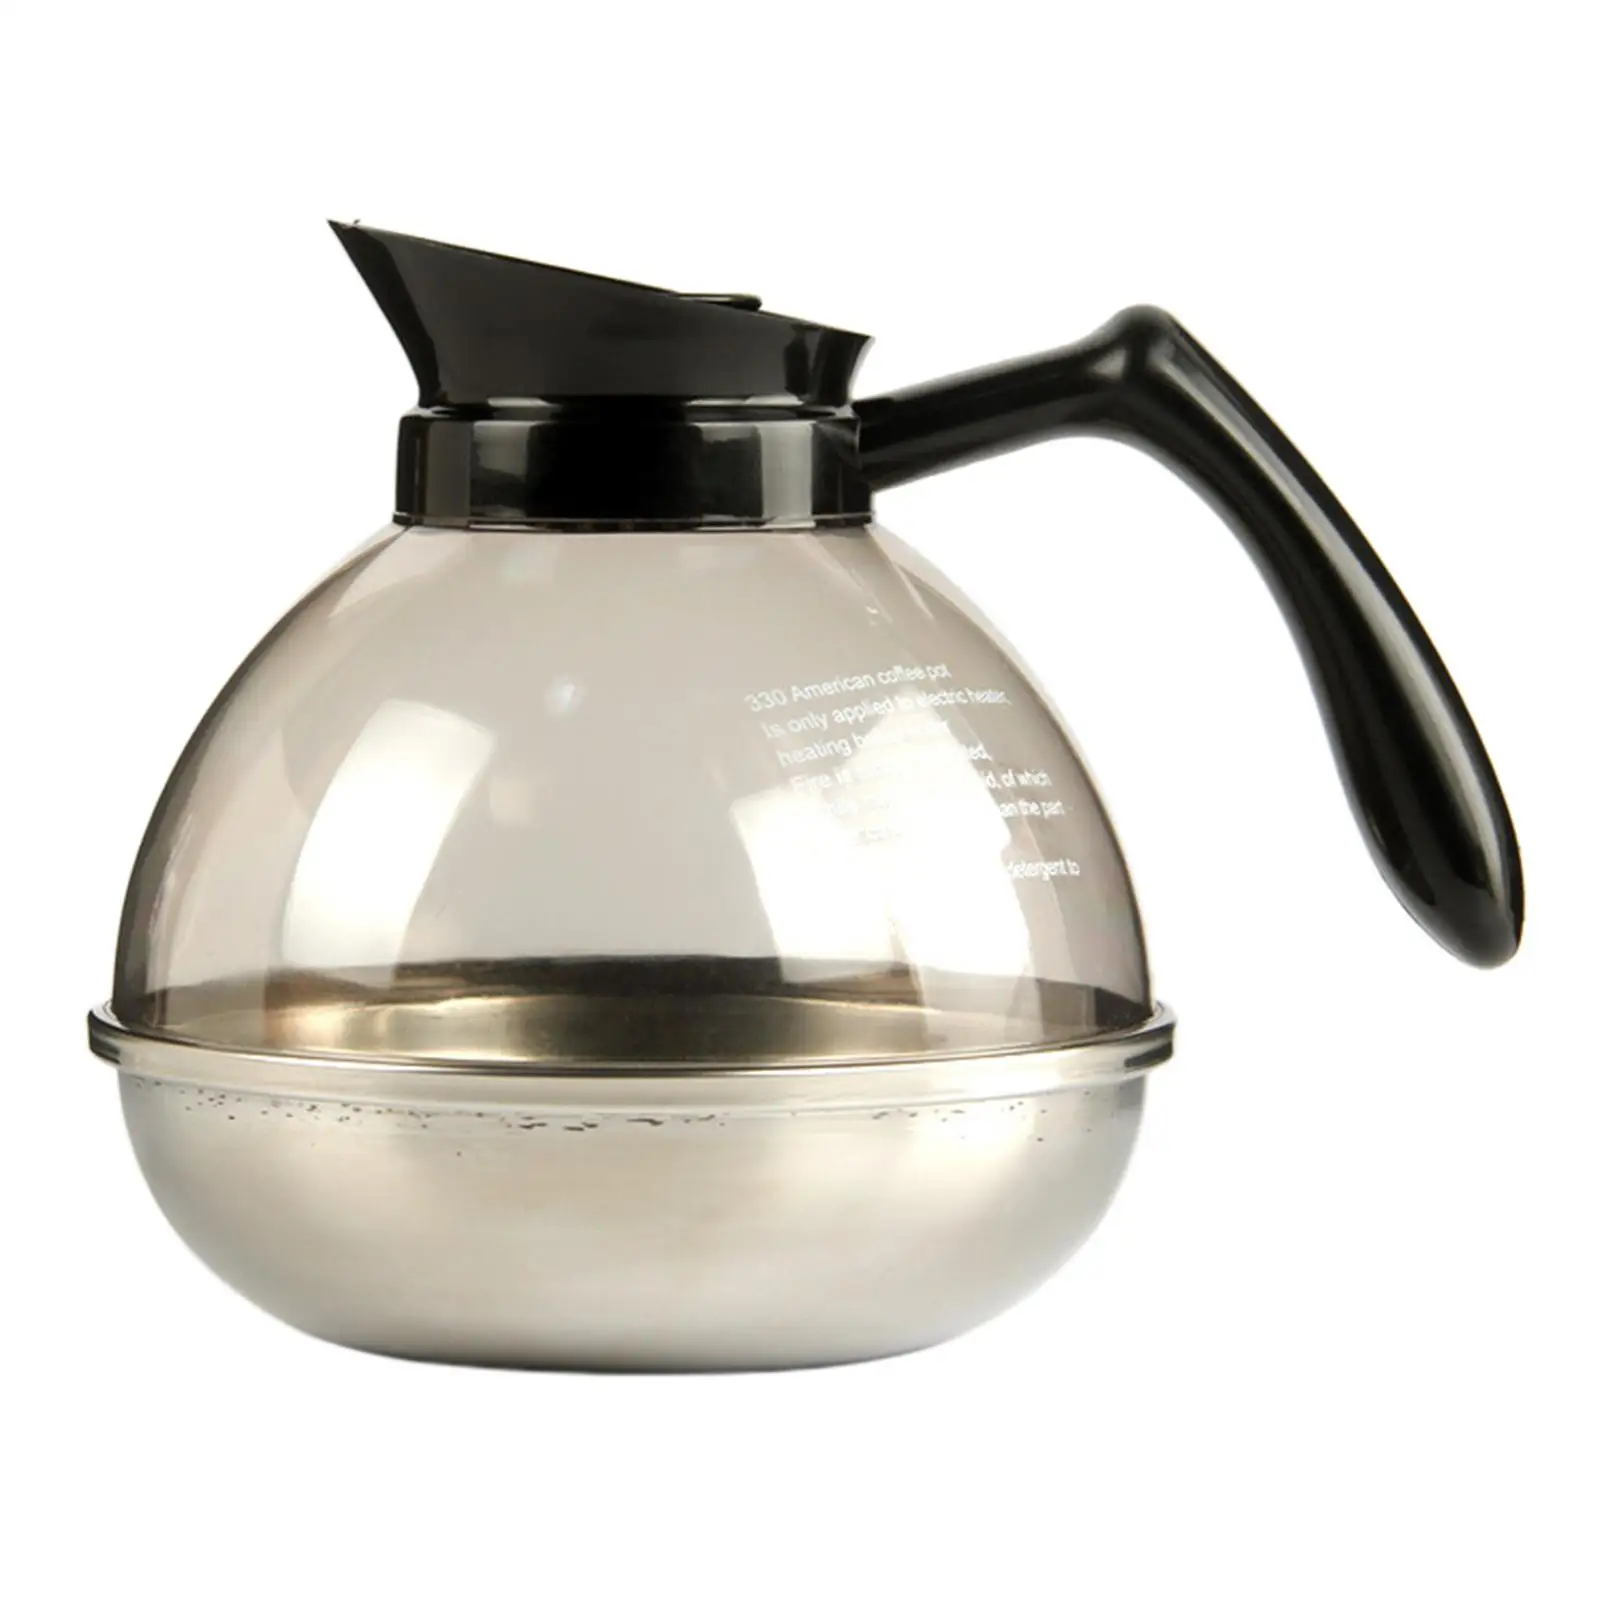 Household Coffee Decanter Heat Resistant -Coffee Carafe- Tea Kettle Coffee Kettle Gifts for Coffee Lovers